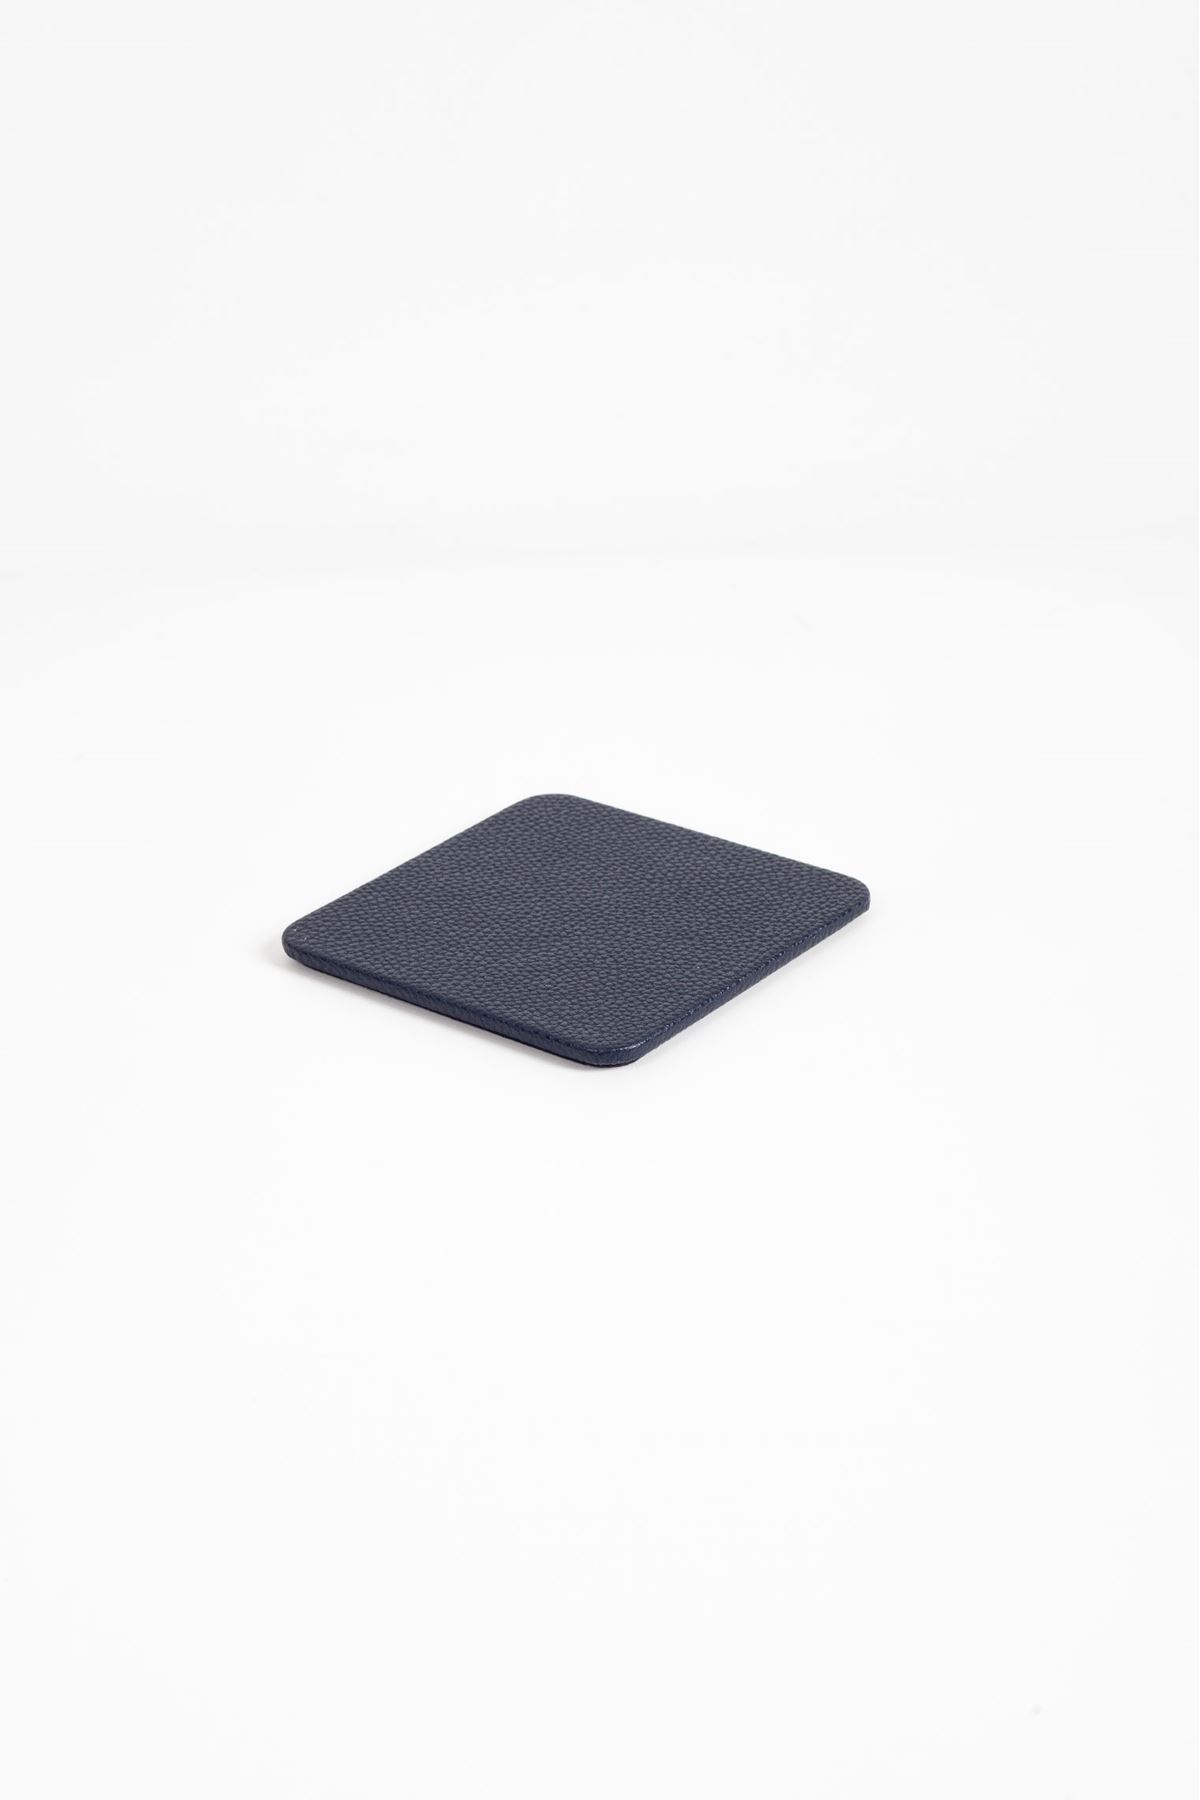 Navy Blue Leather Square Coaster 3 Piece